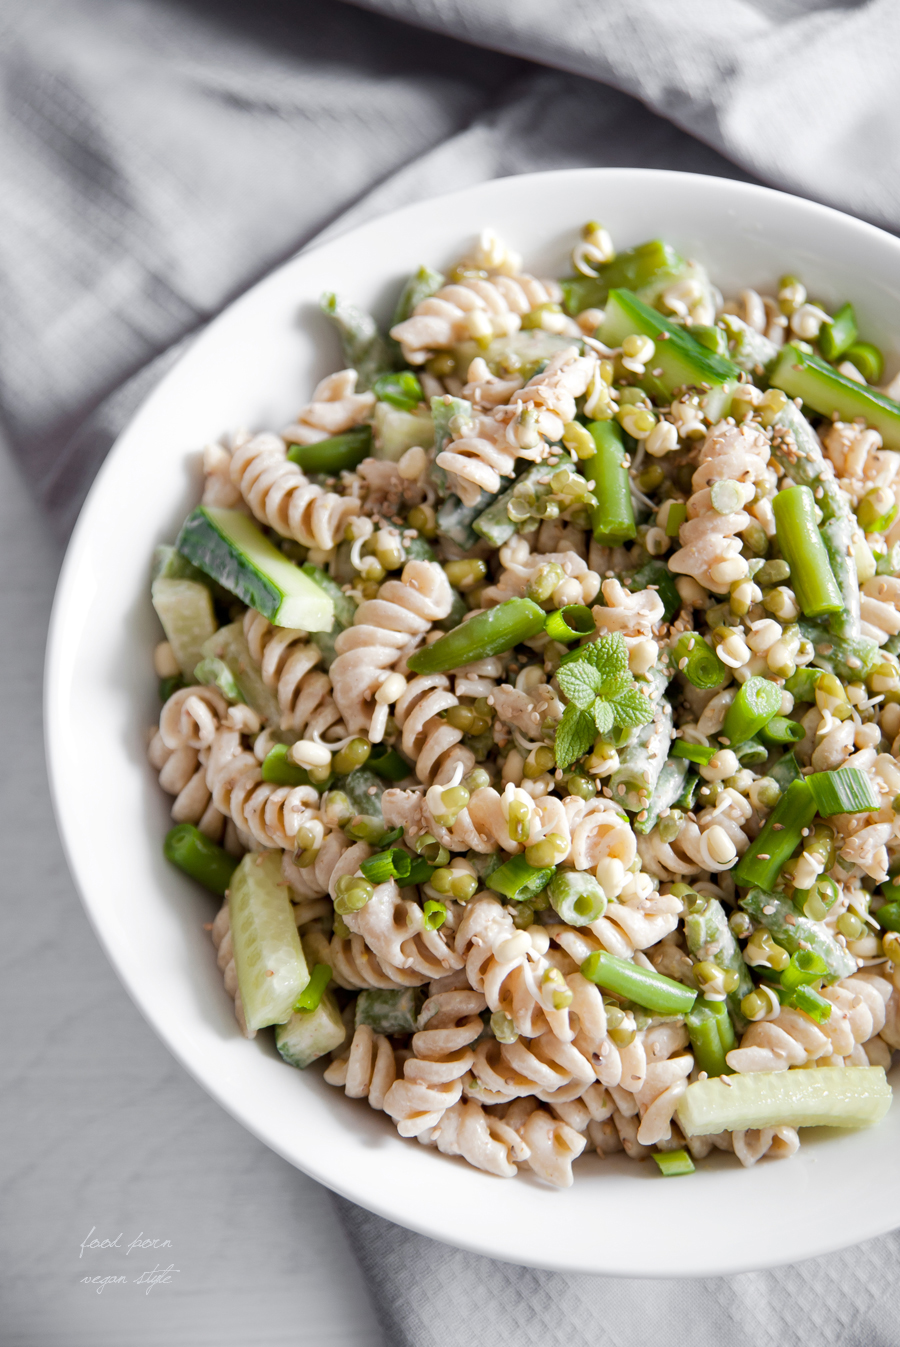 Pasta salad with green beans and tahini dressing